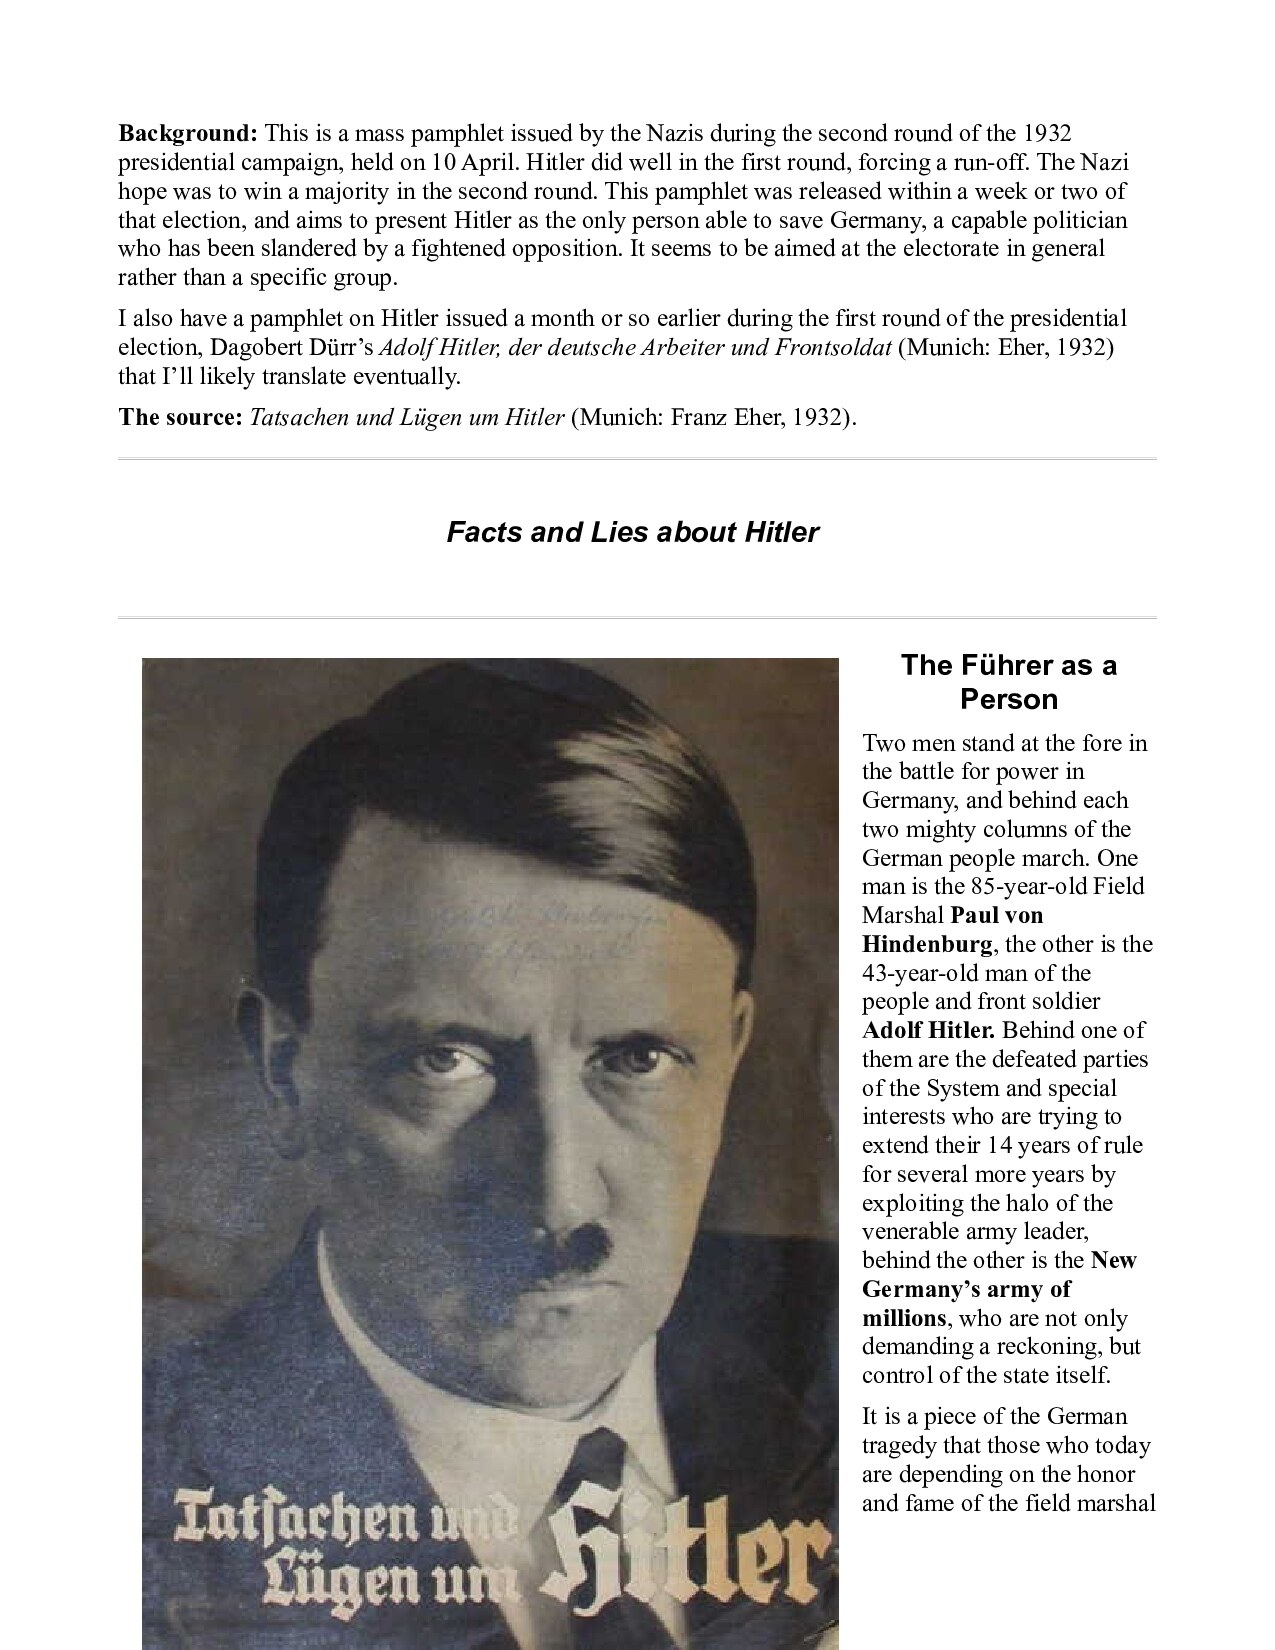 Eher, Franz; Facts and Lies about Hitler